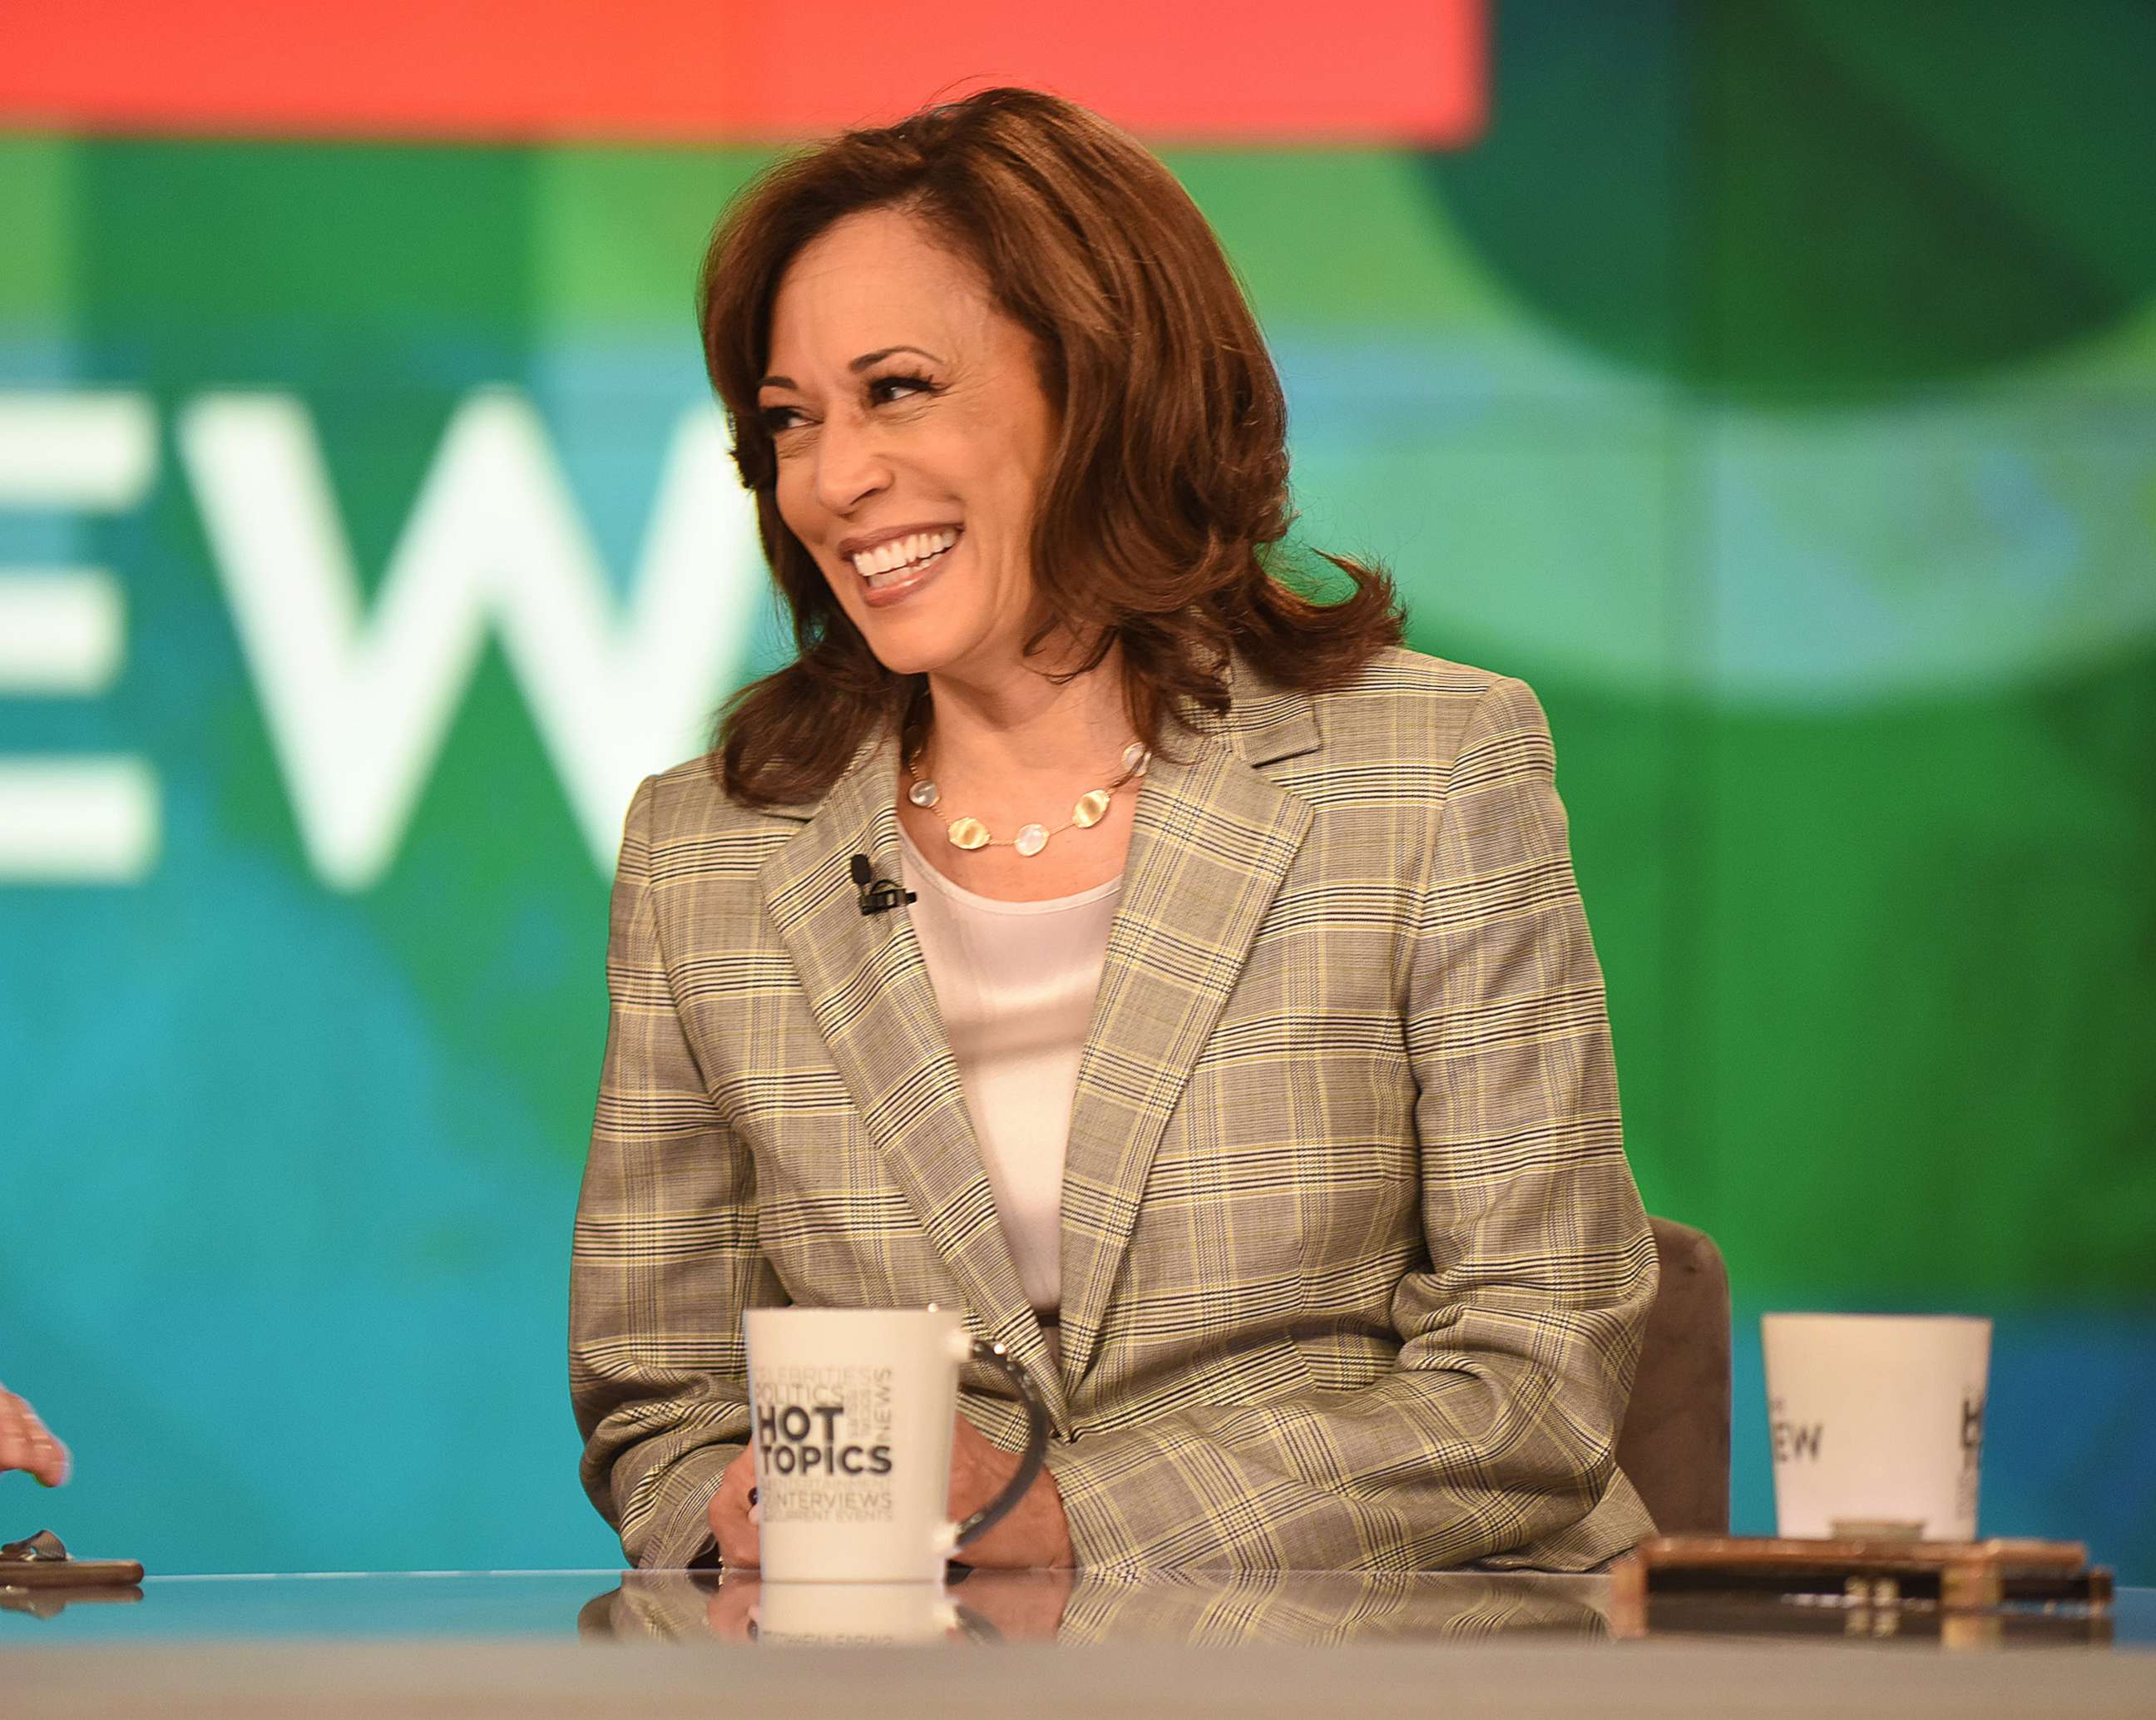 PHOTO: THE VIEW - Kamala Harris appears on ABC's "The View," Friday, July 12, 2019.  "The View" airs Monday-Friday (11am-12pm, ET) on ABC.